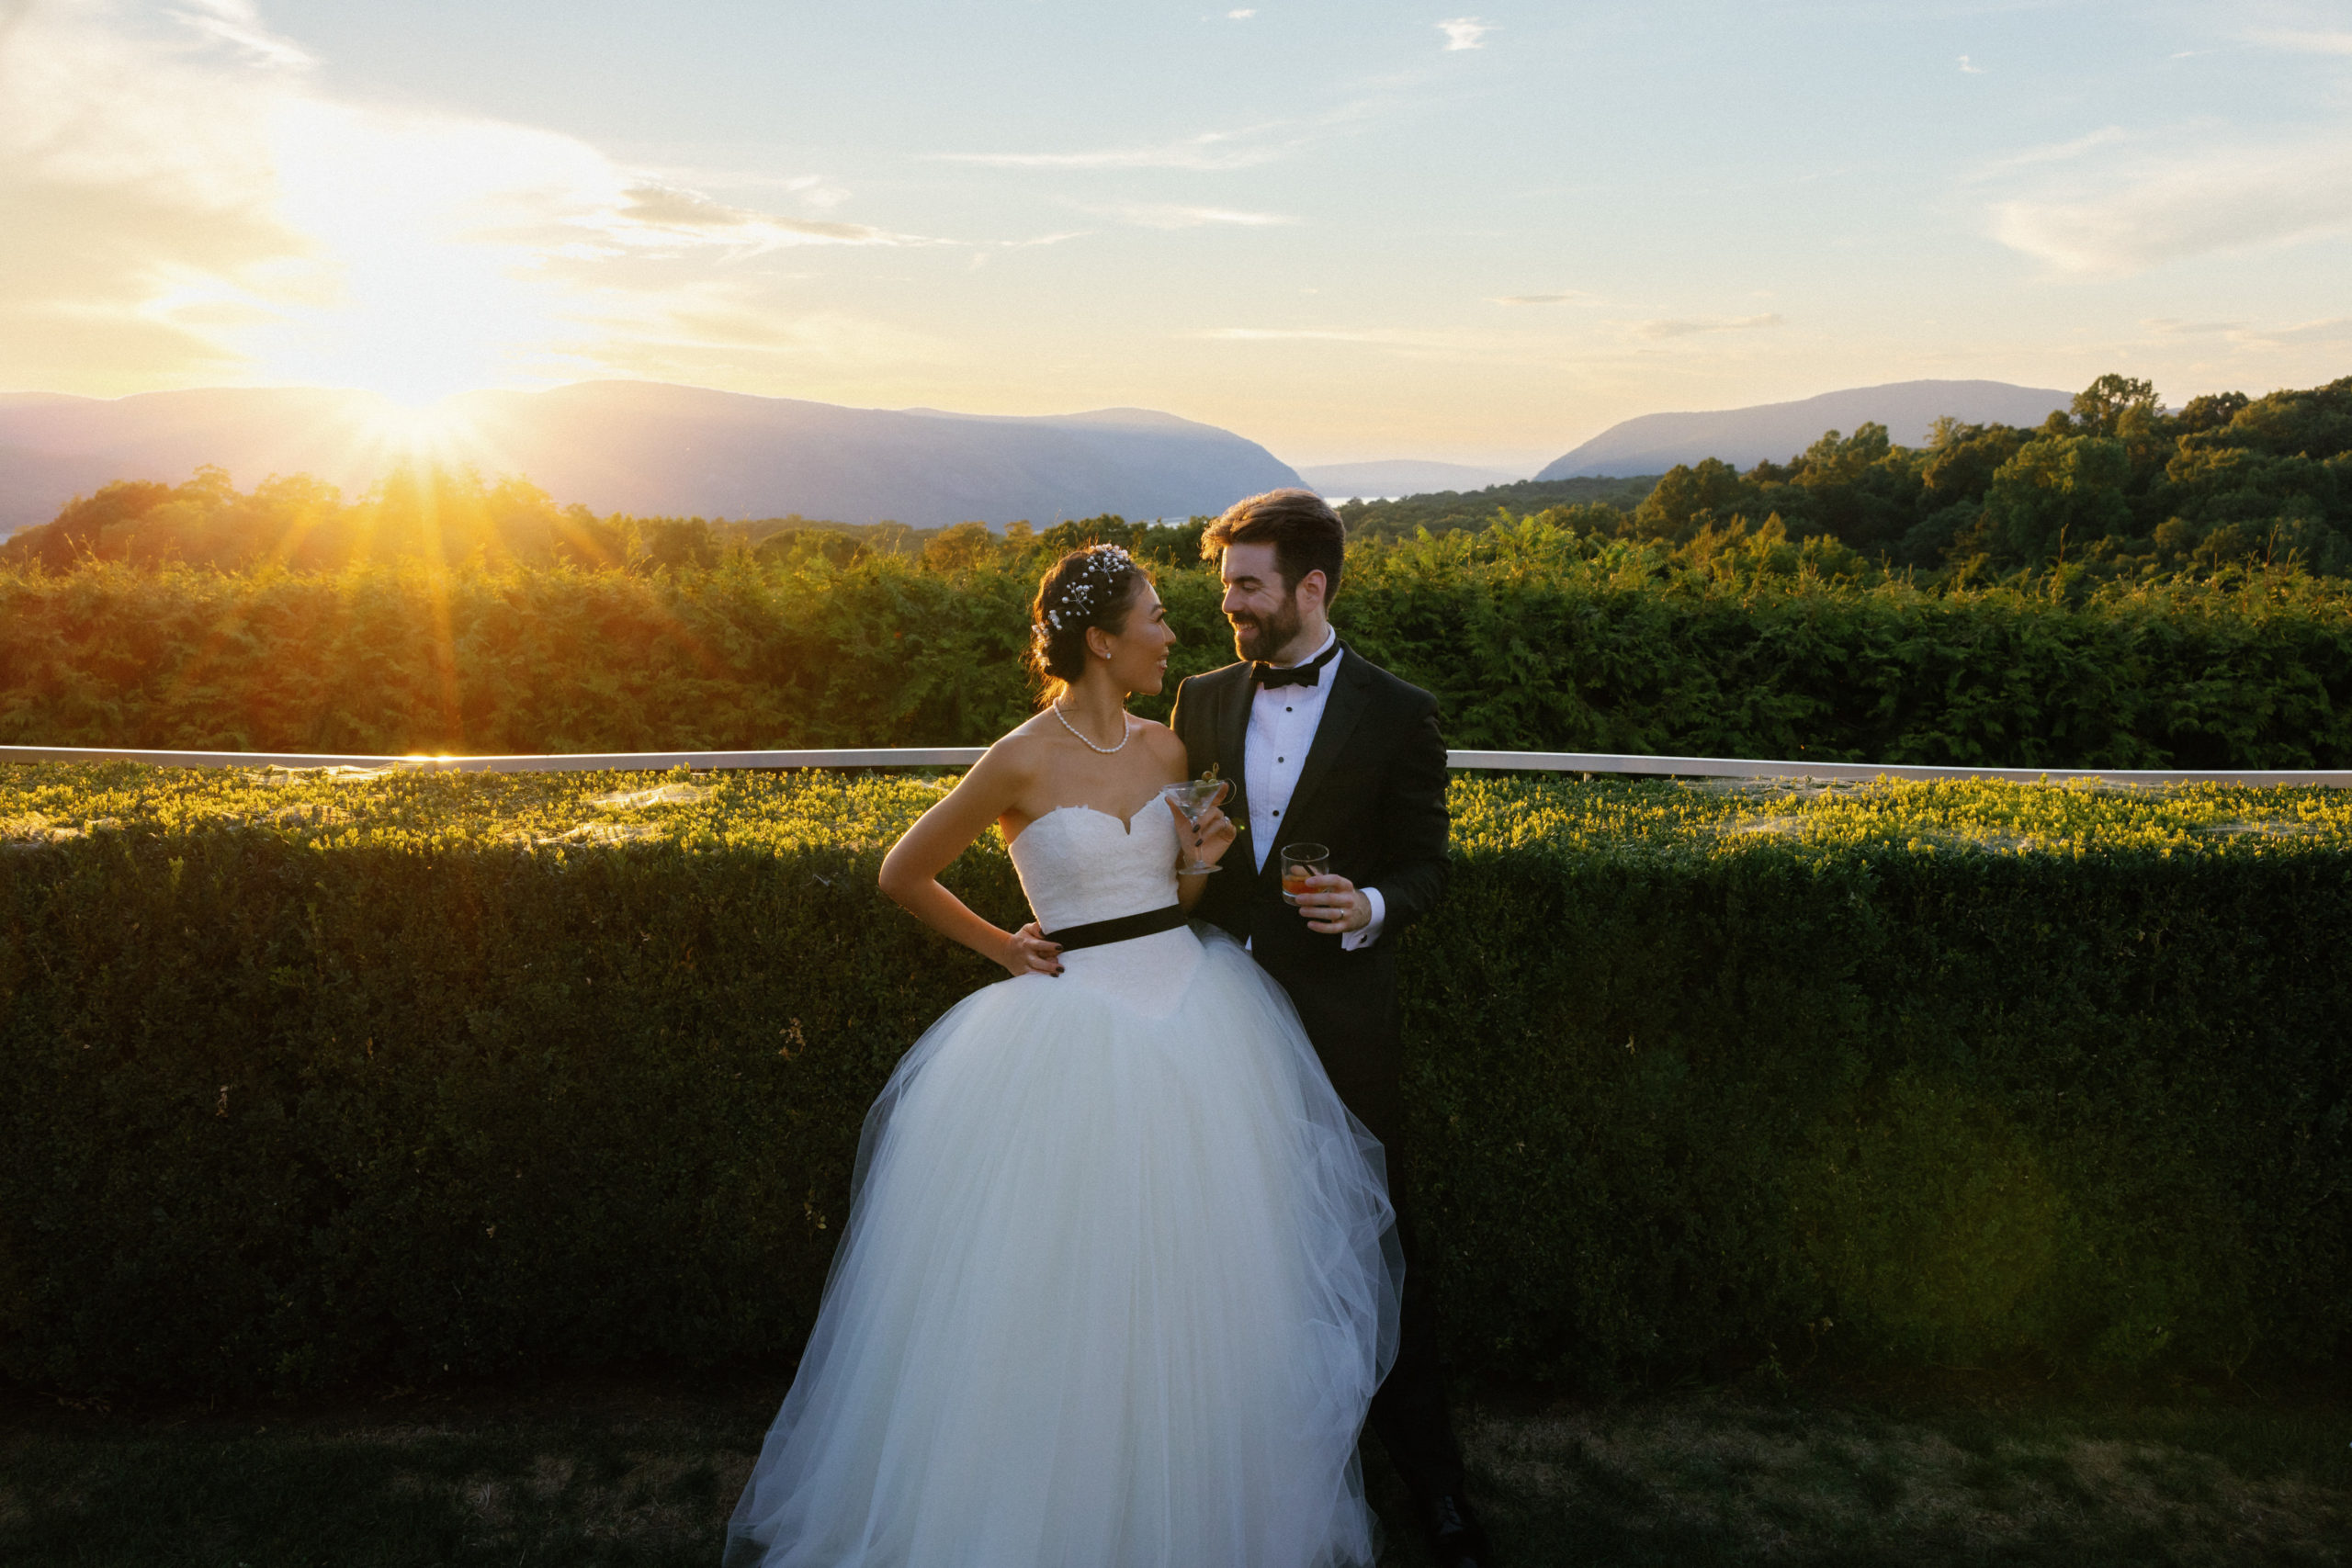 The bride and groom are smiling at each other while holding glasses of champagne. Sunset in the background. Image by Jenny Fu Studio